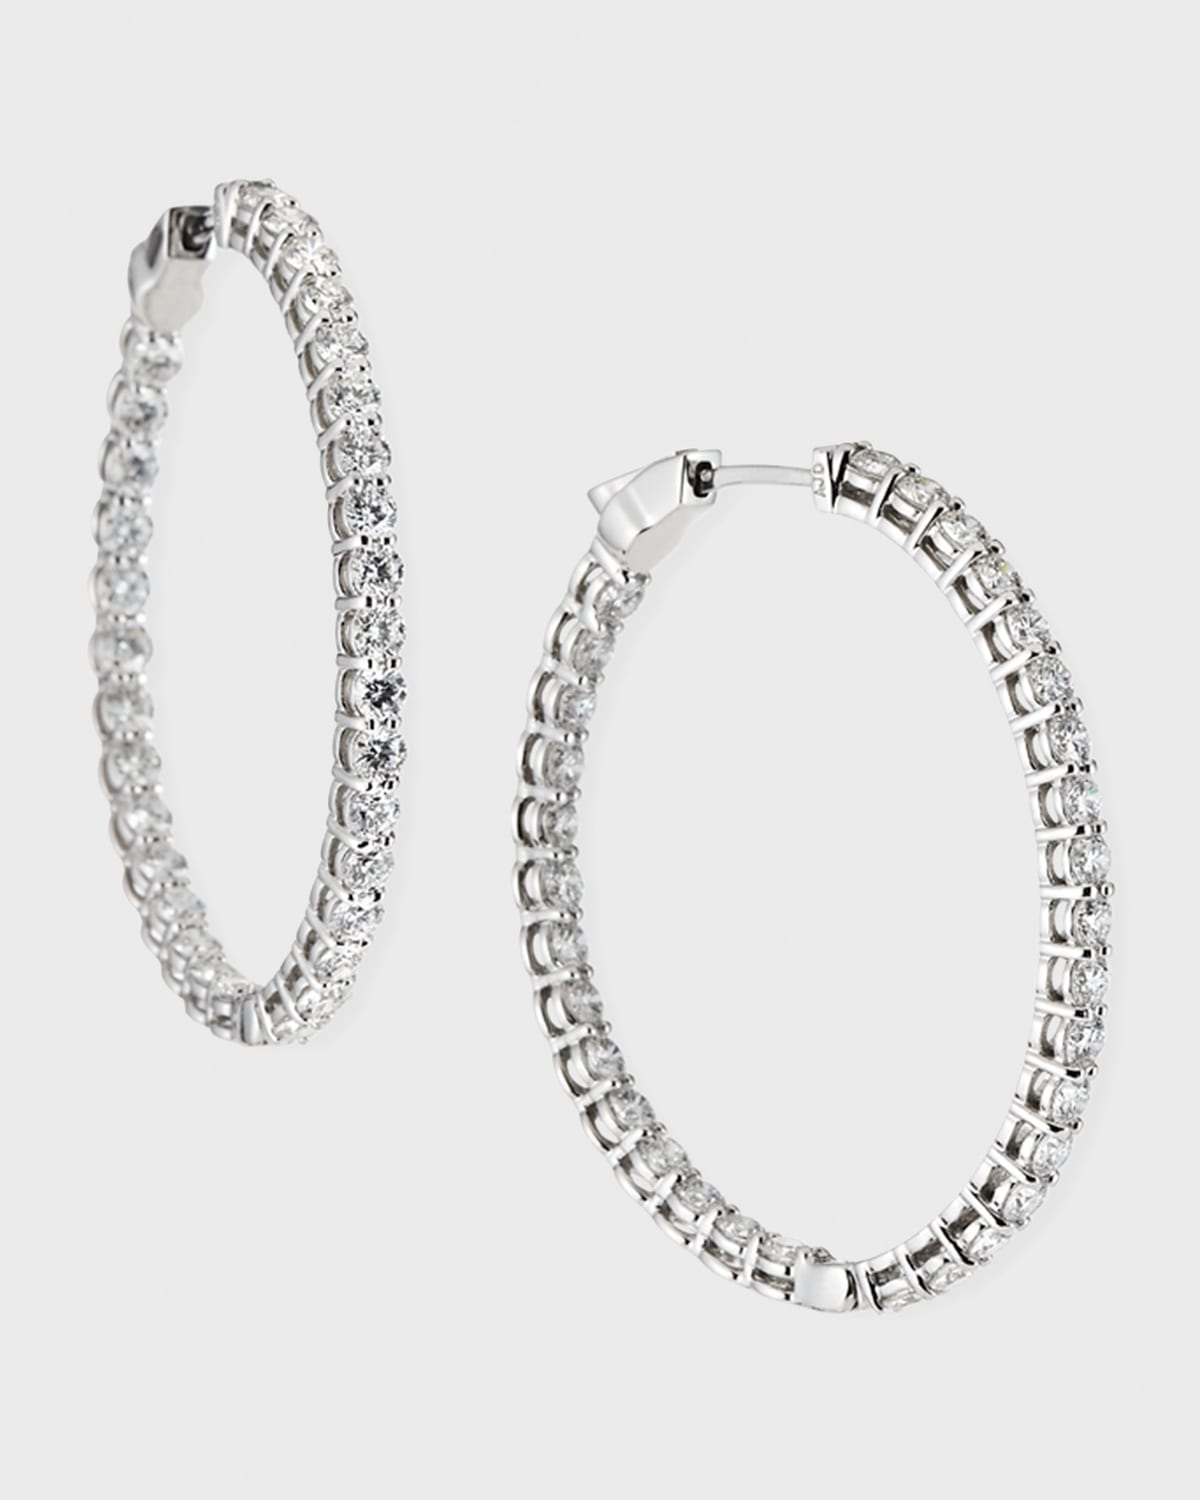 NM Diamond Collection 18k White Gold Diamond Inside-Out Hoop Earrings, 3.36tcw